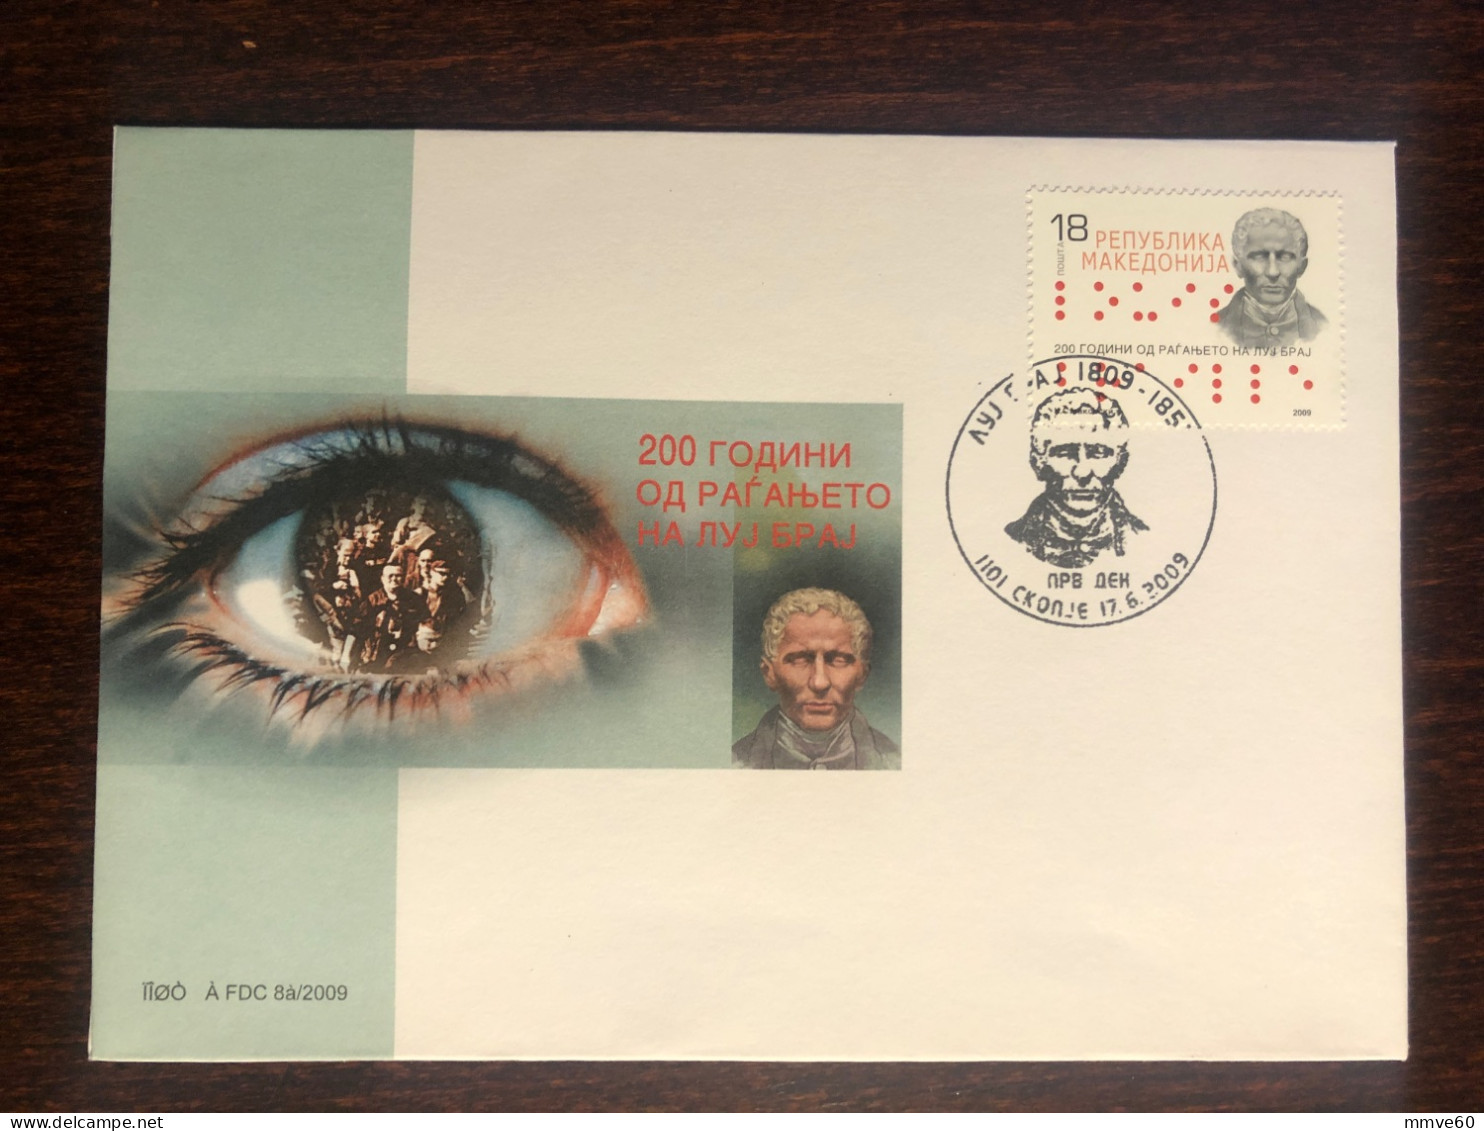 MACEDONIA FDC COVER 2009 YEAR  BLINDNESS BLIND BRAILLE HEALTH MEDICINE STAMPS - North Macedonia